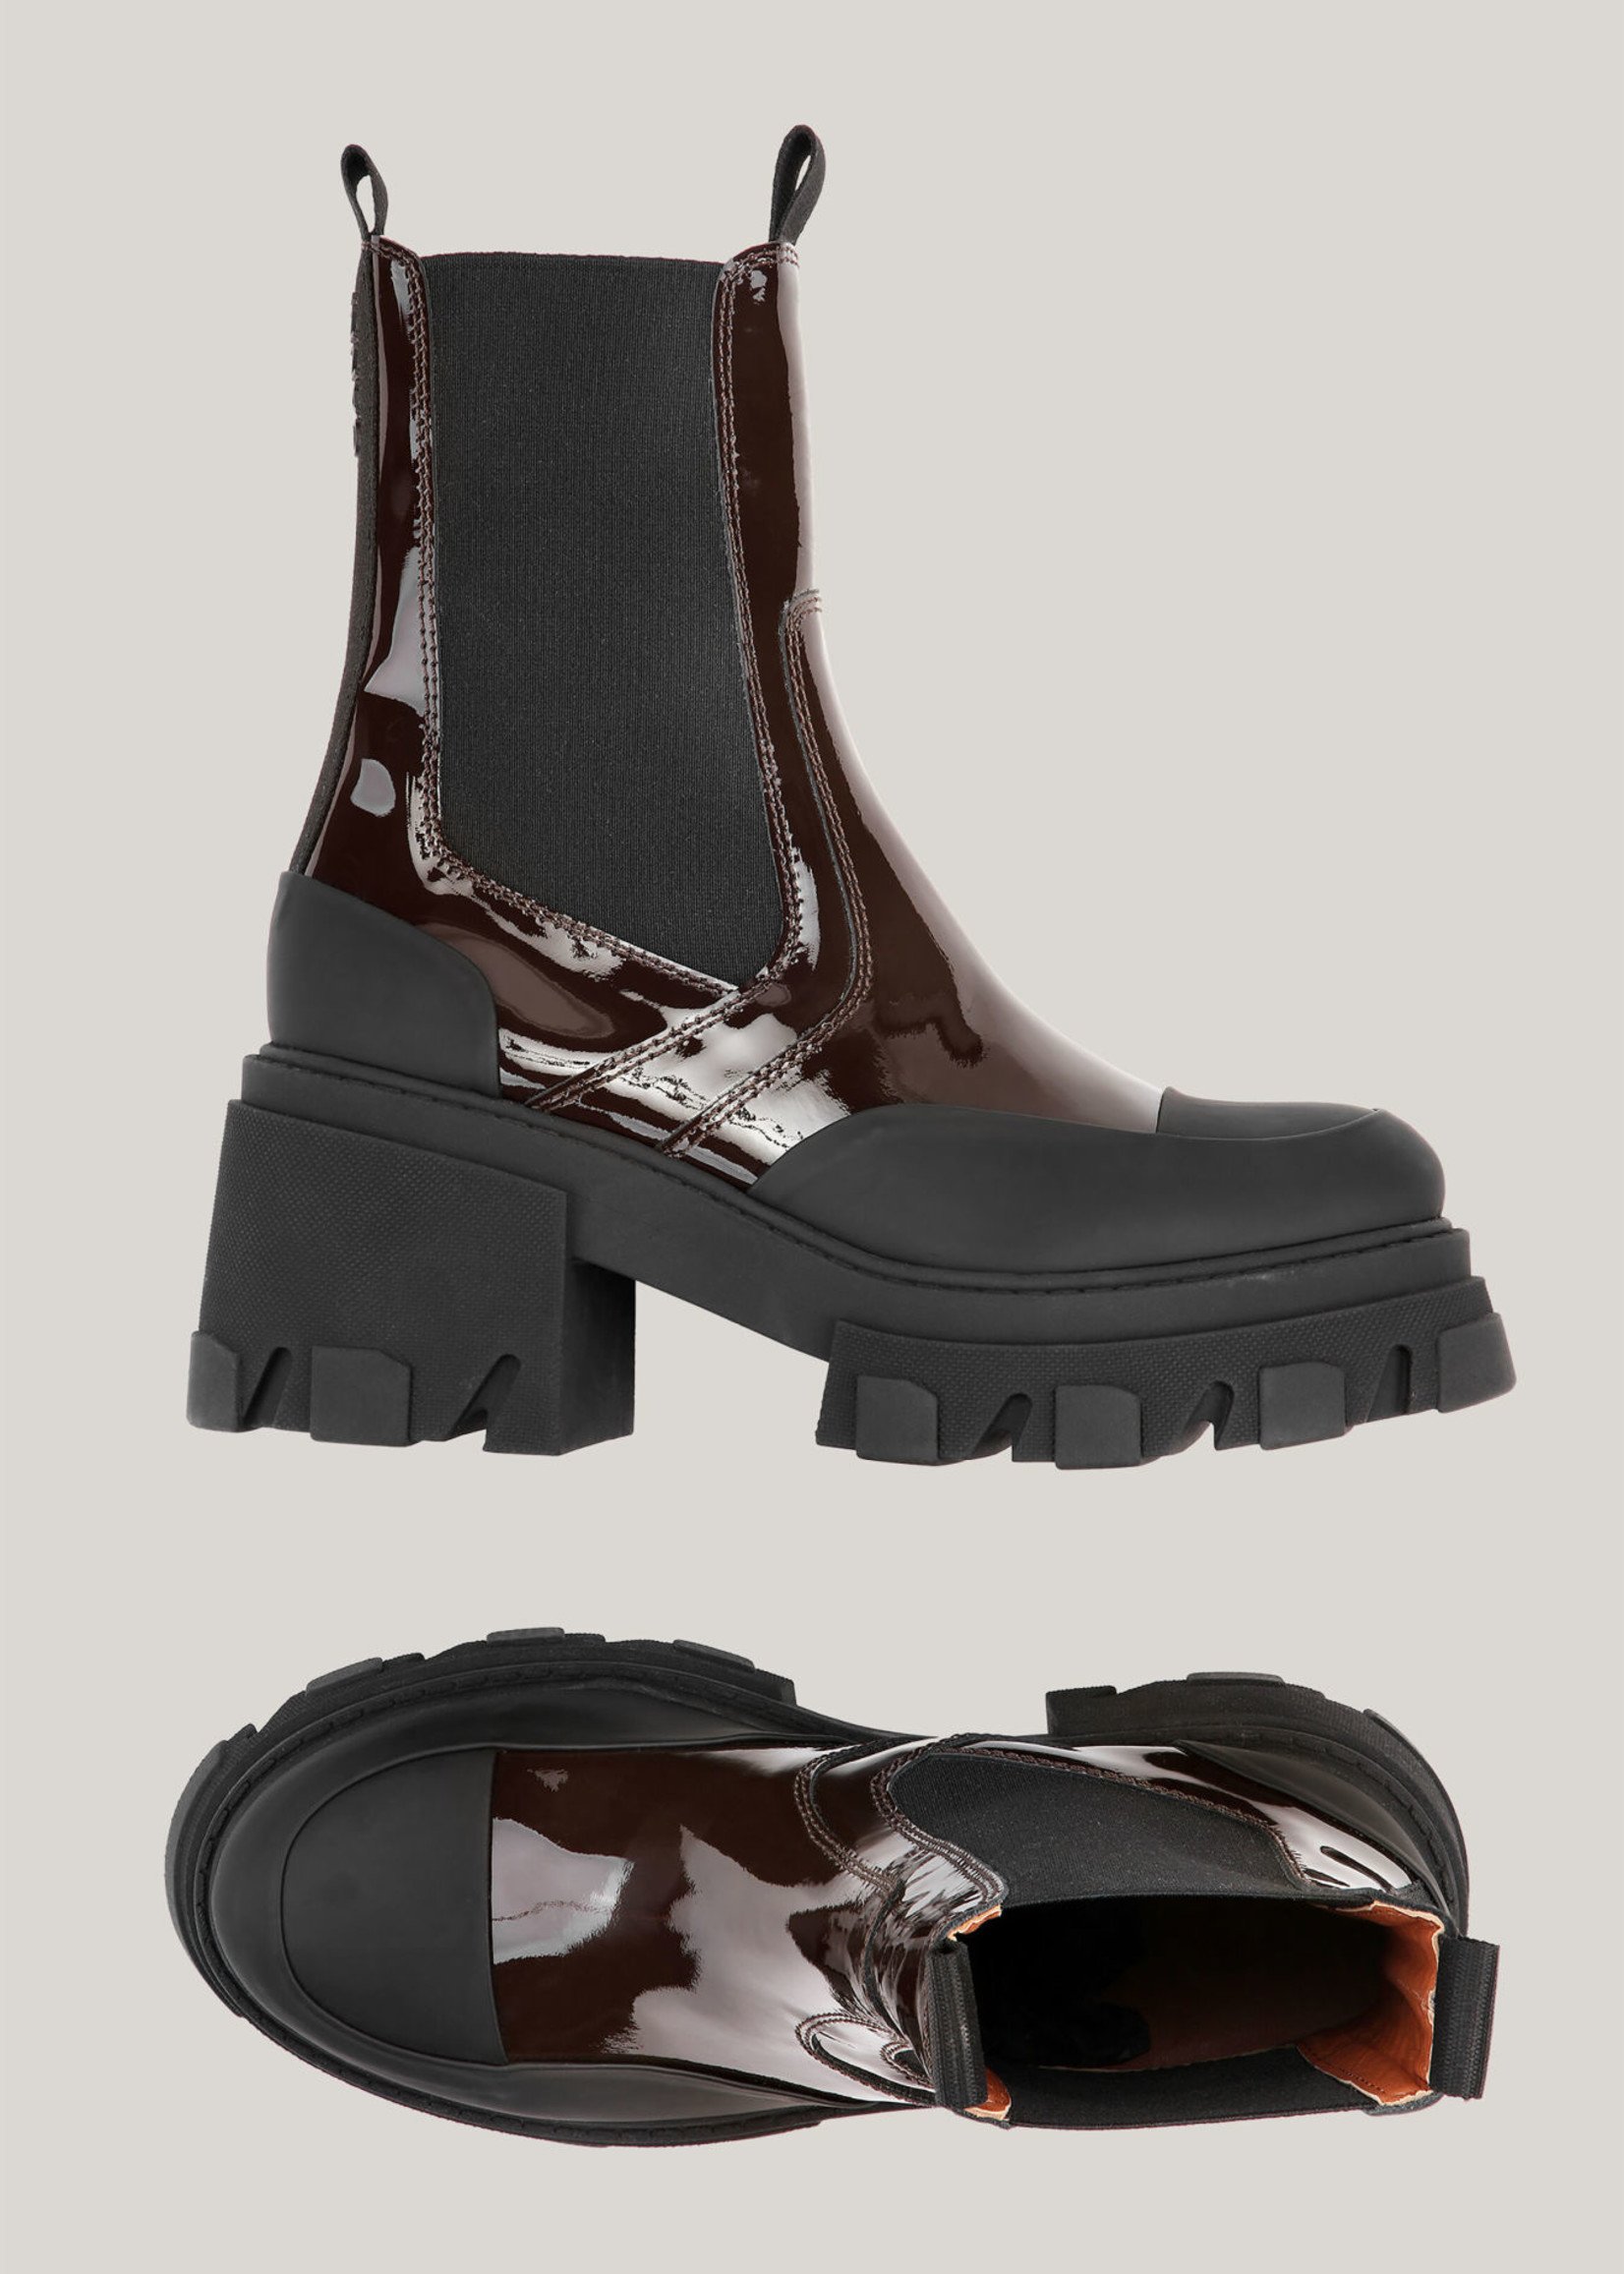 GANNI Heeled Chelsea Boot in Brown Patent Leather